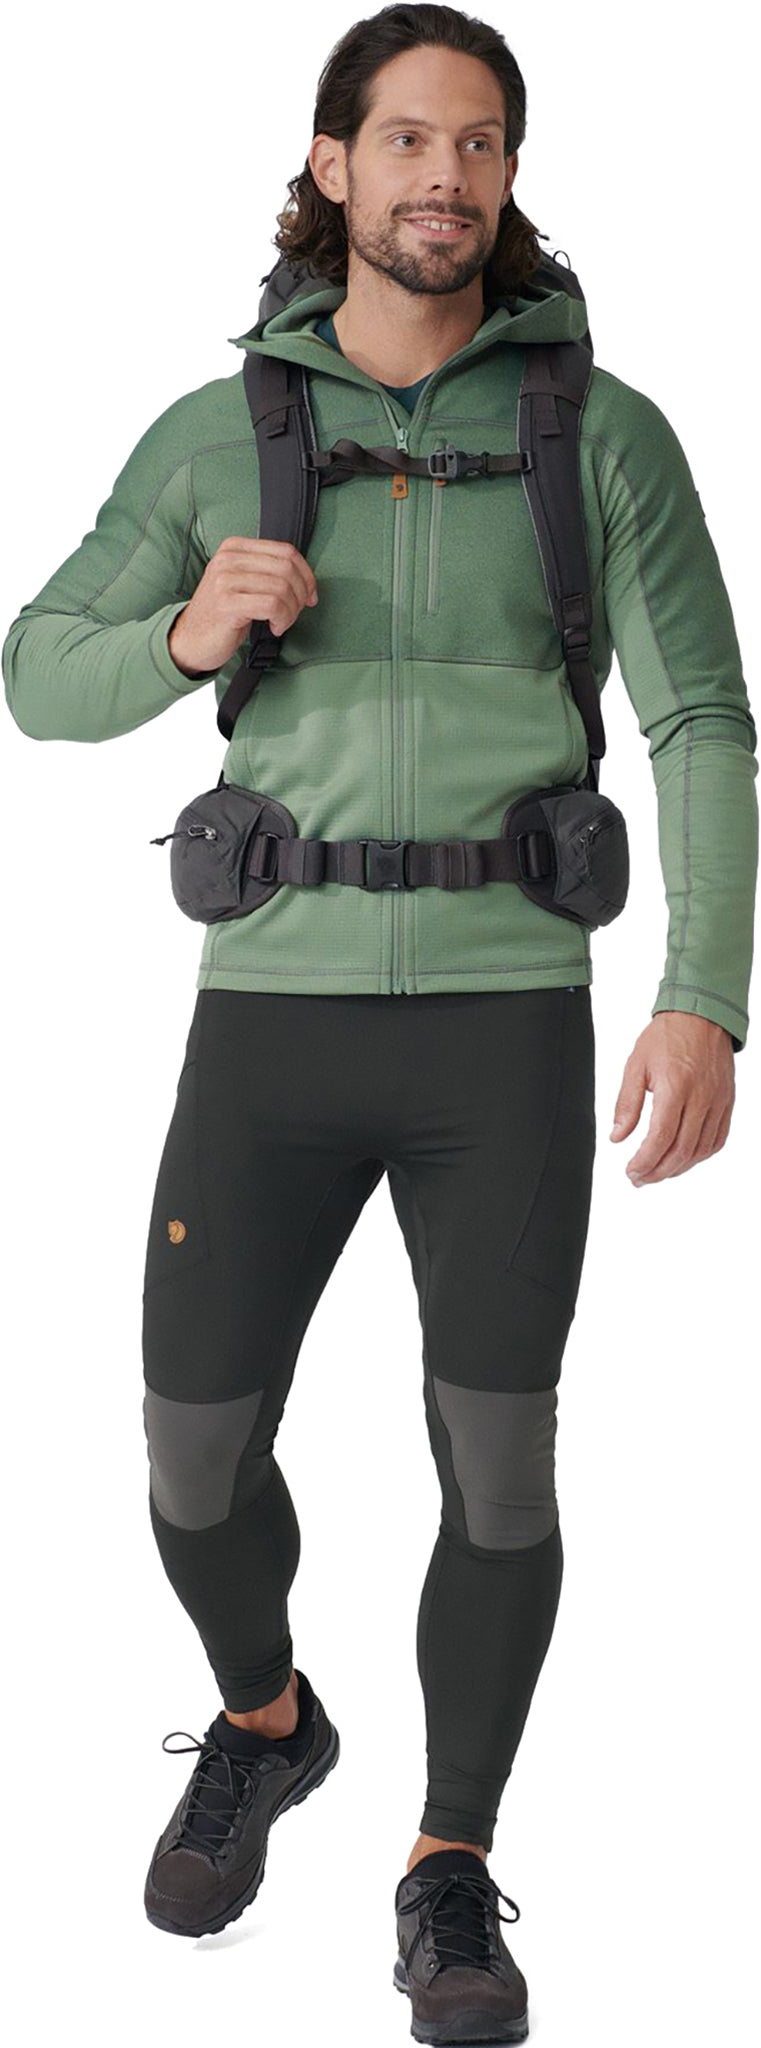 New gear  Fjallraven unveils new trekking tights for men and